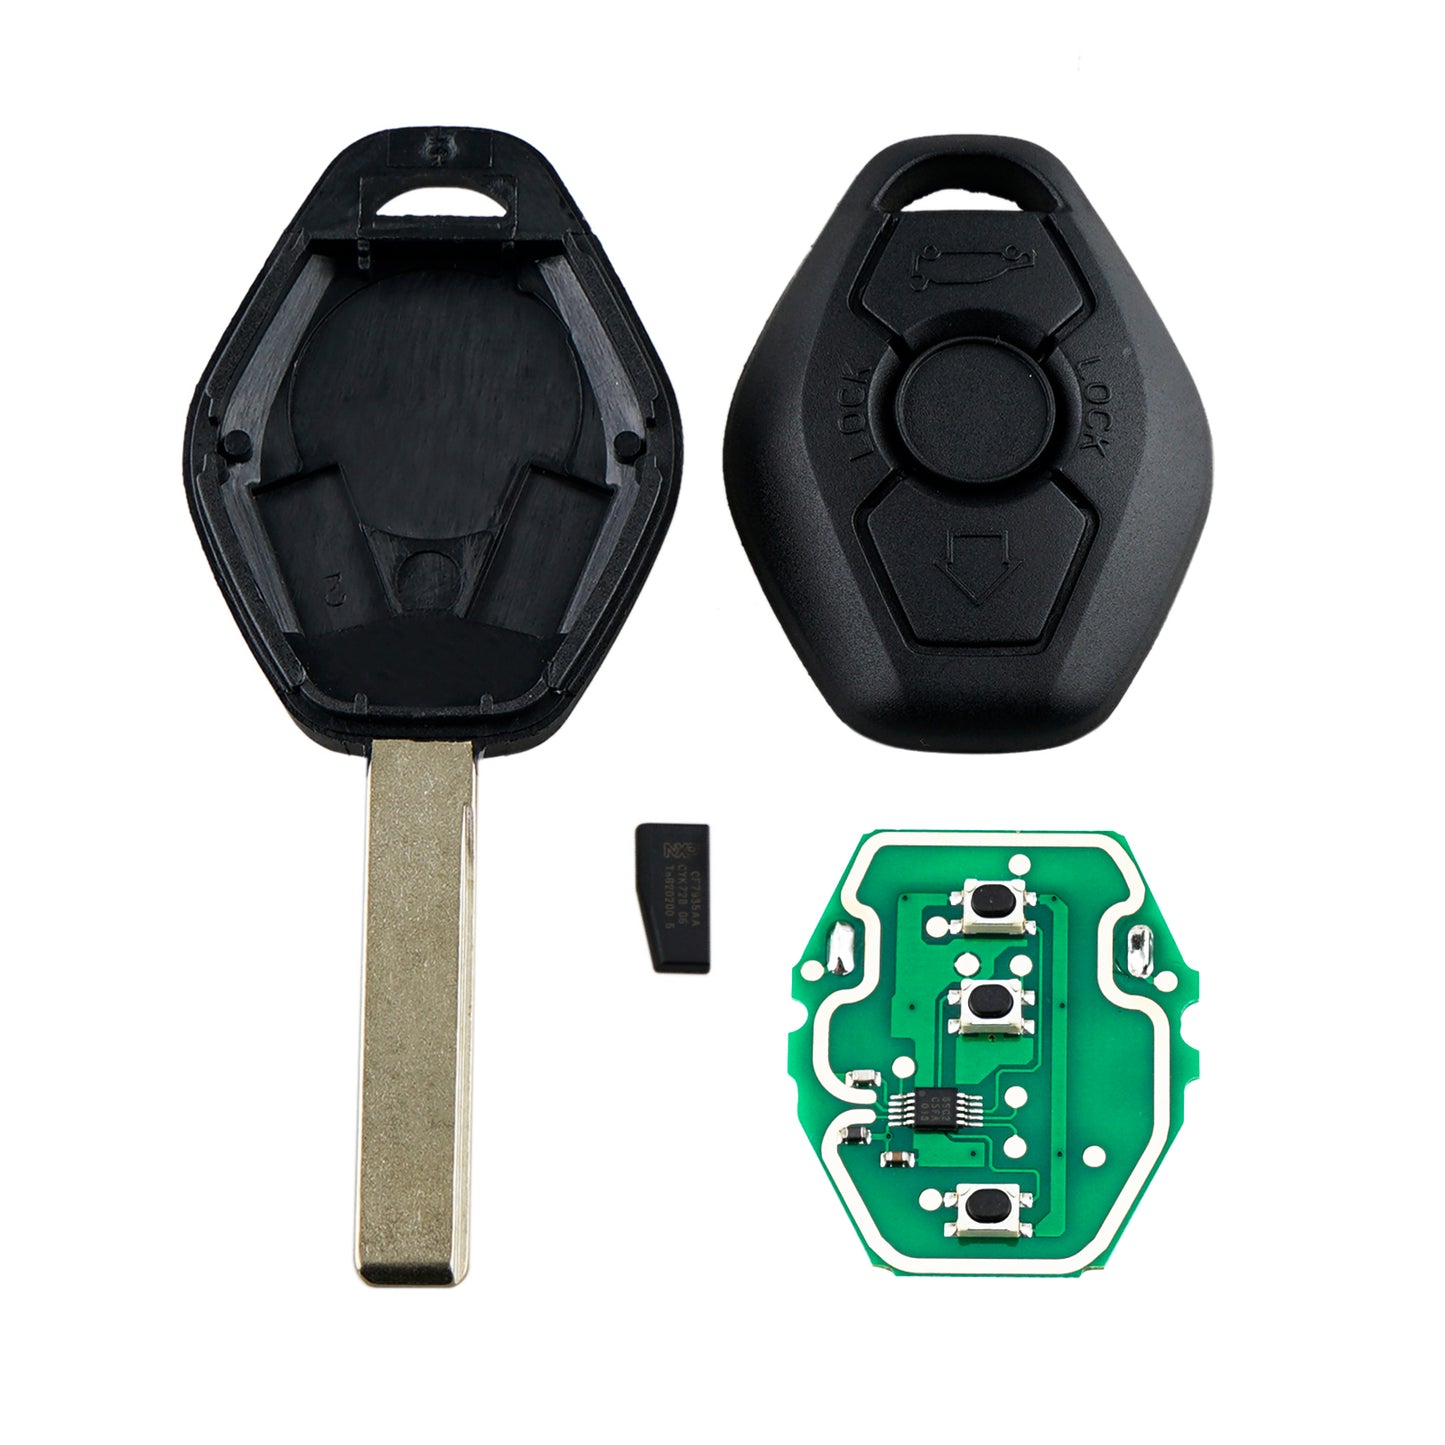 3 Buttons 315MHz Keyless Entry Fob Remote Car Key For1999-2009 BMW 3 5 6 7Series M3 Z8 Z3 X5 M5 X3 Z4 FCC ID: LX8FZV SKU : J344